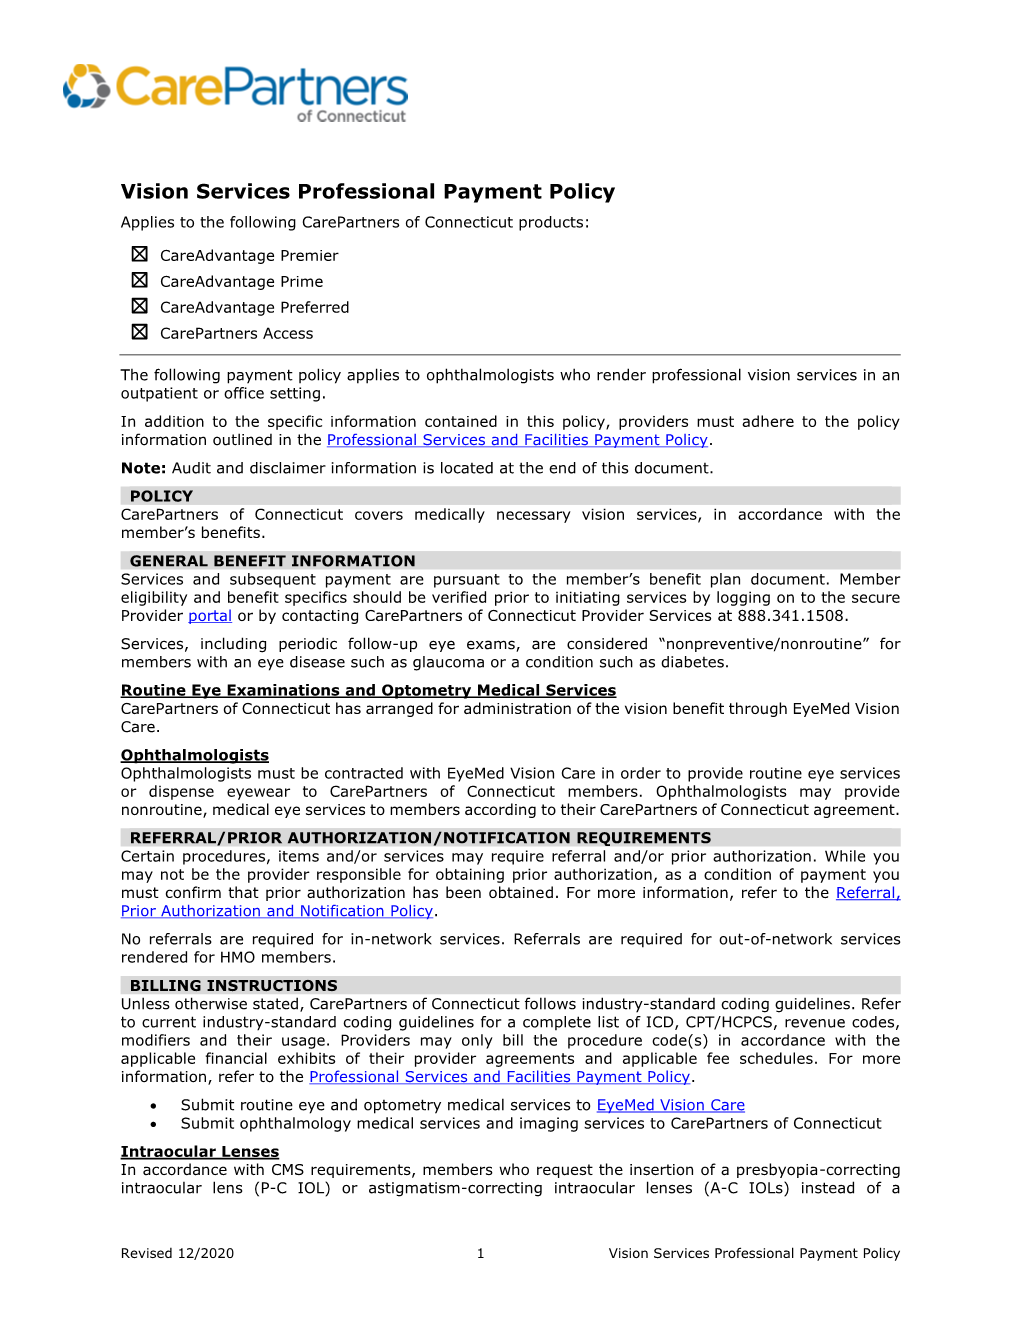 Vision Services Professional Payment Policy Applies to the Following Carepartners of Connecticut Products